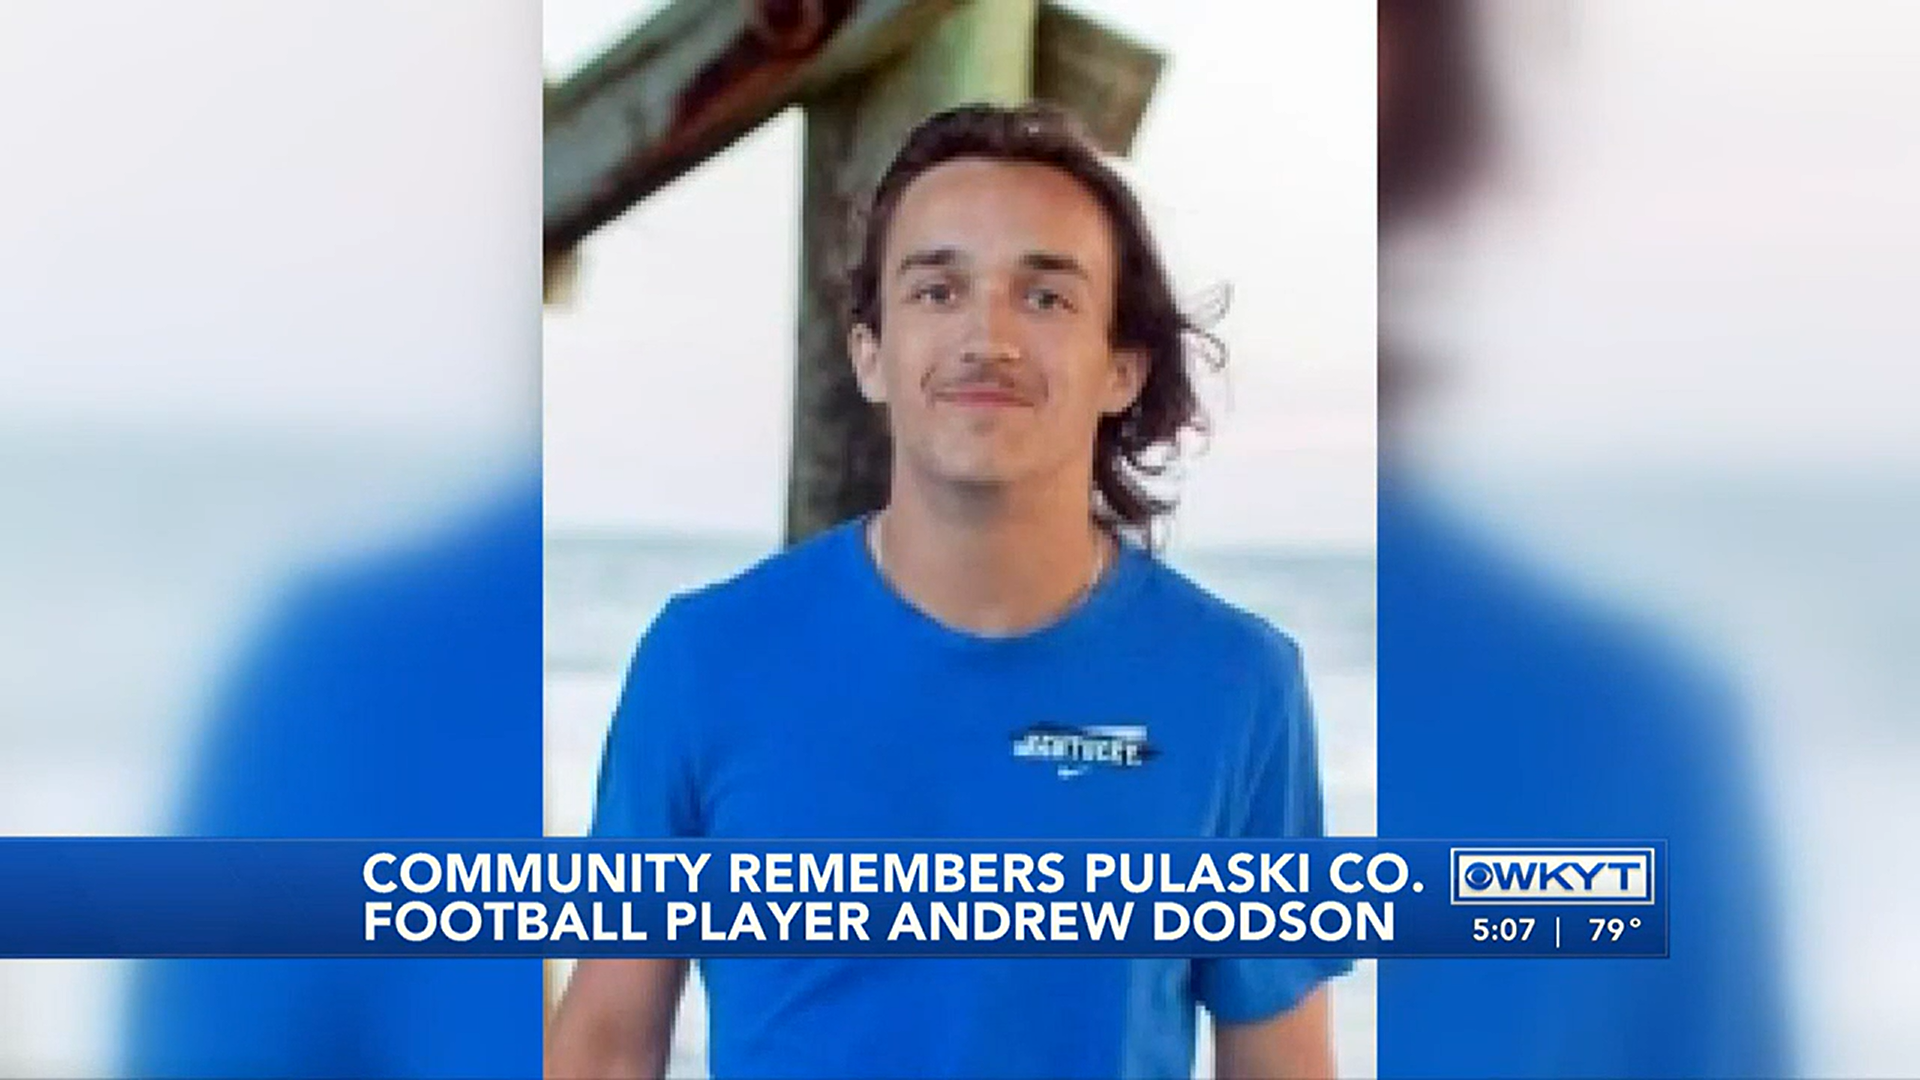 Pulaski County High School player in Kentucky died on Monday after suffering head injury during a game